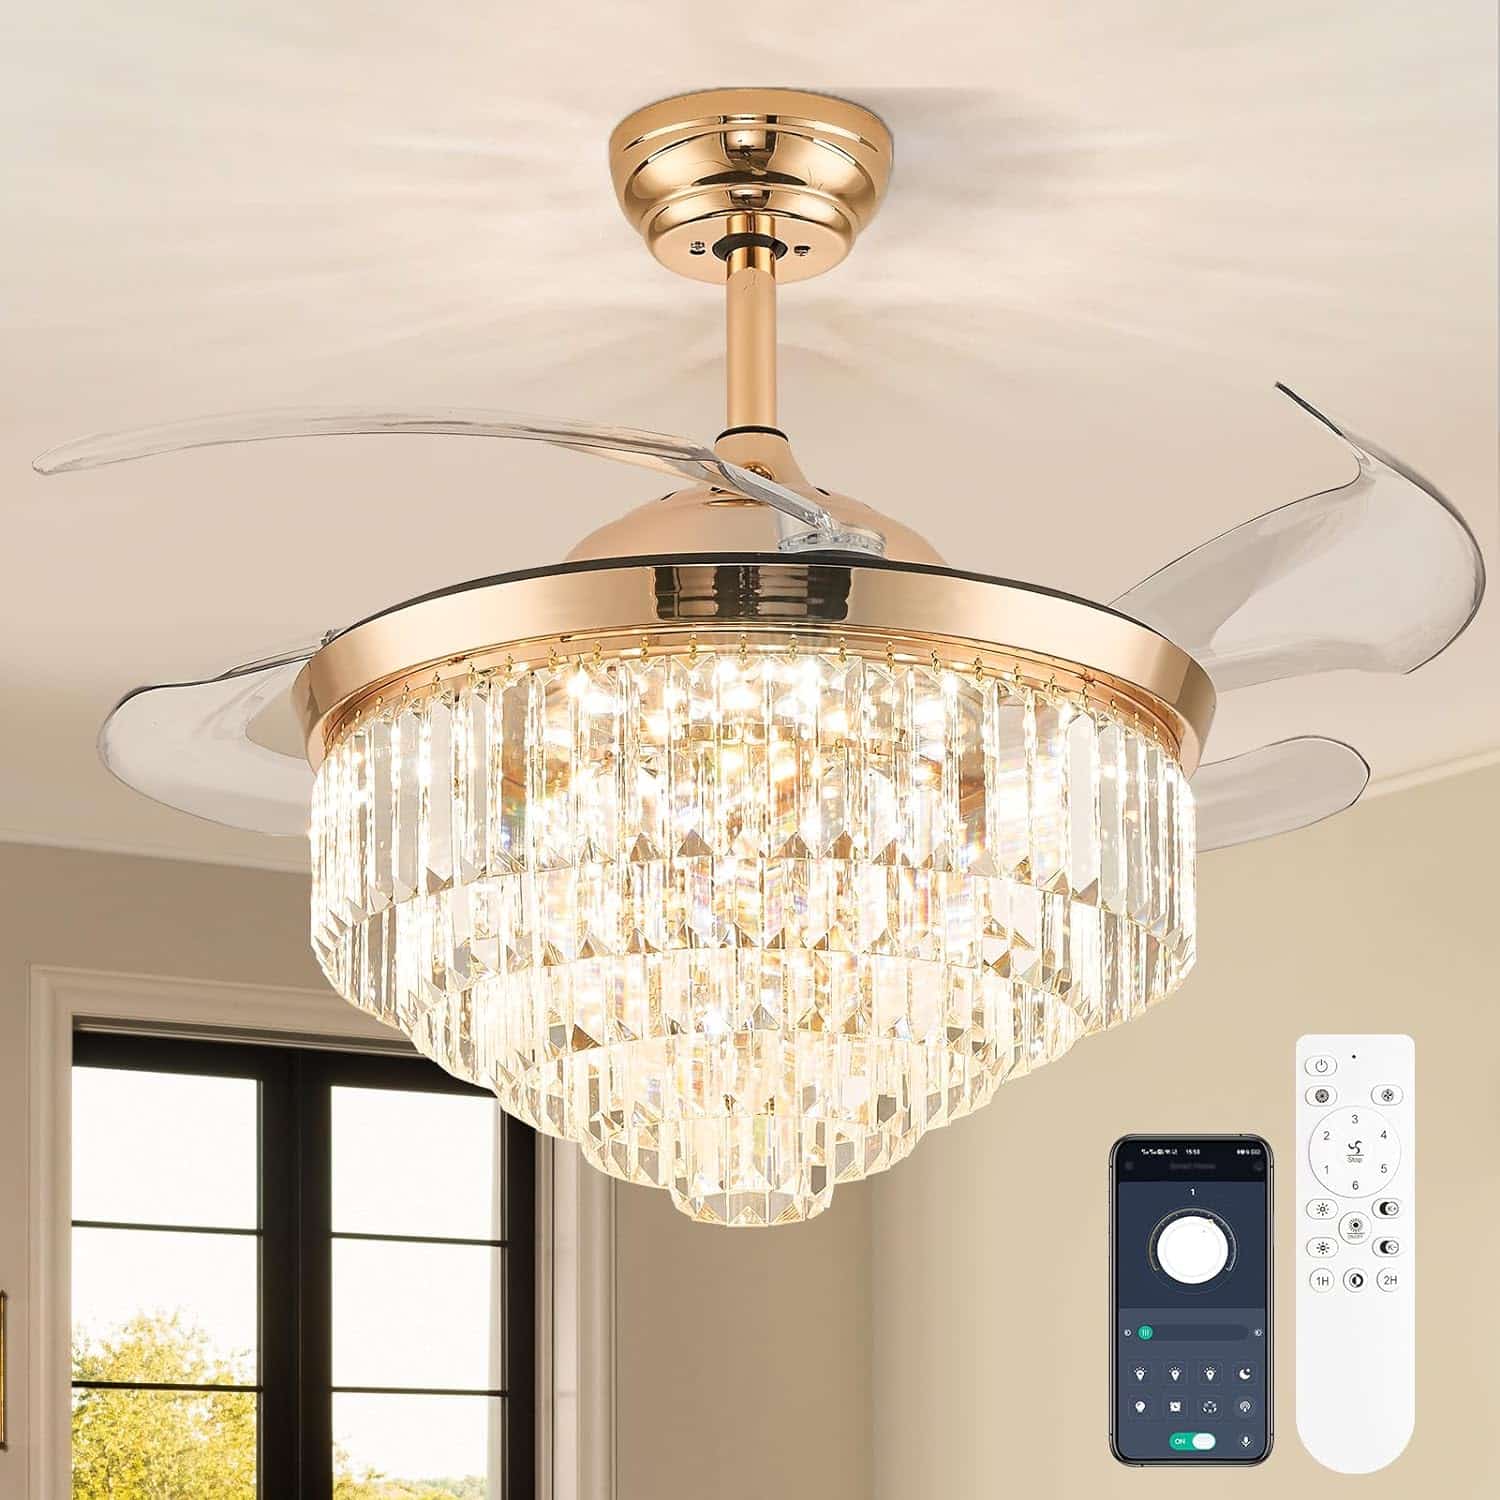 Finktonglan 42 Luxury Gold Chandelier Fan, Fandeliers with Invisible ABS Blades Modern Crystal Ceiling Fans with Remote Control, LED Crystal Chandelier Fan 3 Color Changeable, 6 Speed